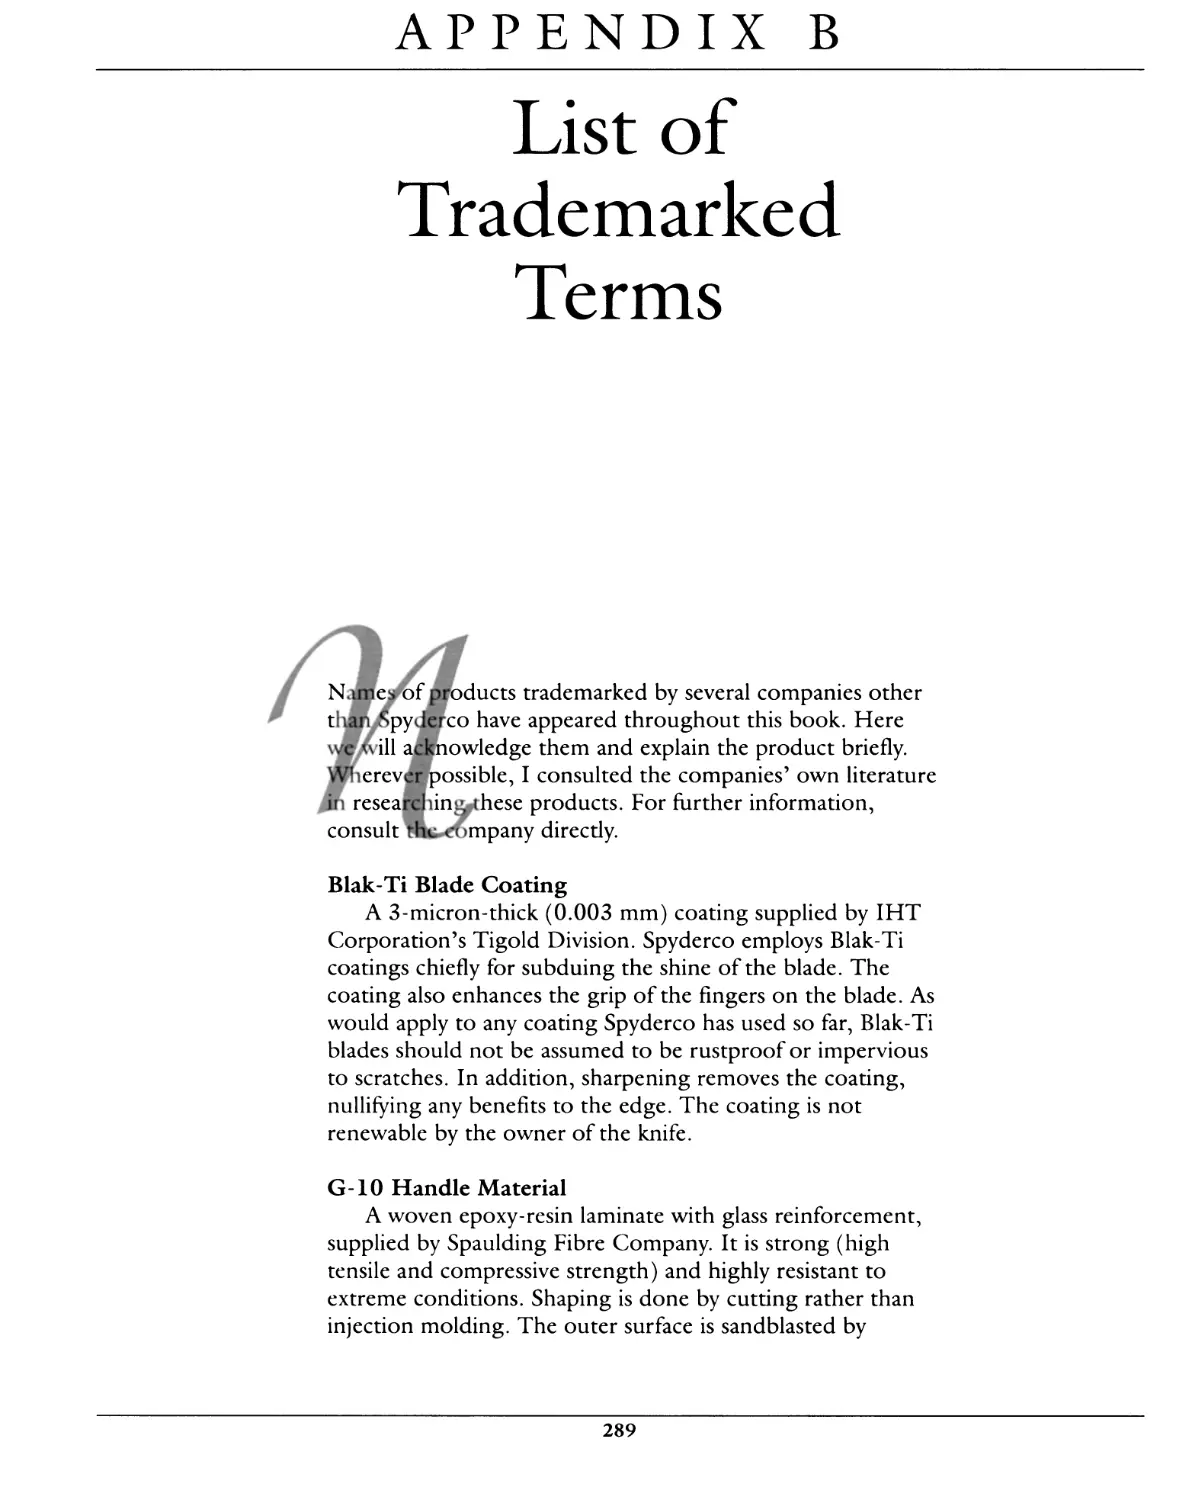 APPENDIX B: LIST OF TRADEMARKED TERMS